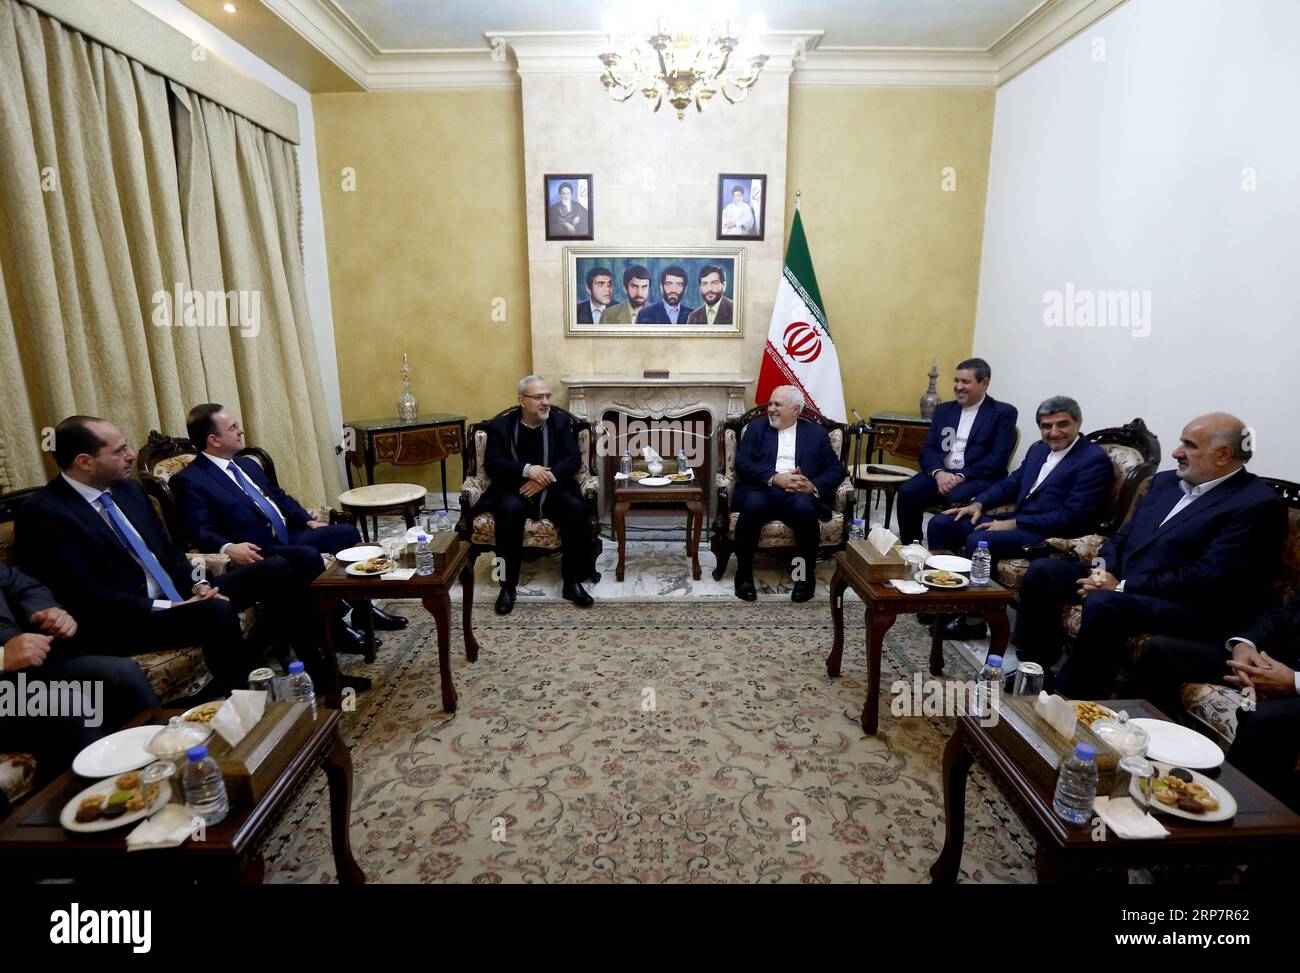 (190210) -- BEIRUT, Feb. 10, 2019 -- Iranian Foreign Minister Mohammad Javad Zarif (4th R) meets with Lebanese officials in the Iranian Embassy in Beirut, Lebanon, on Feb. 10, 2019. Zarif arrived in Lebanon on Sunday for a two-day official visit to meet with Lebanese officials and informed them about Iran s readiness to help Lebanon on all levels. ) LEBANON-BEIRUT-IRAN-FM-VISIT BilalxJawich PUBLICATIONxNOTxINxCHN Stock Photo